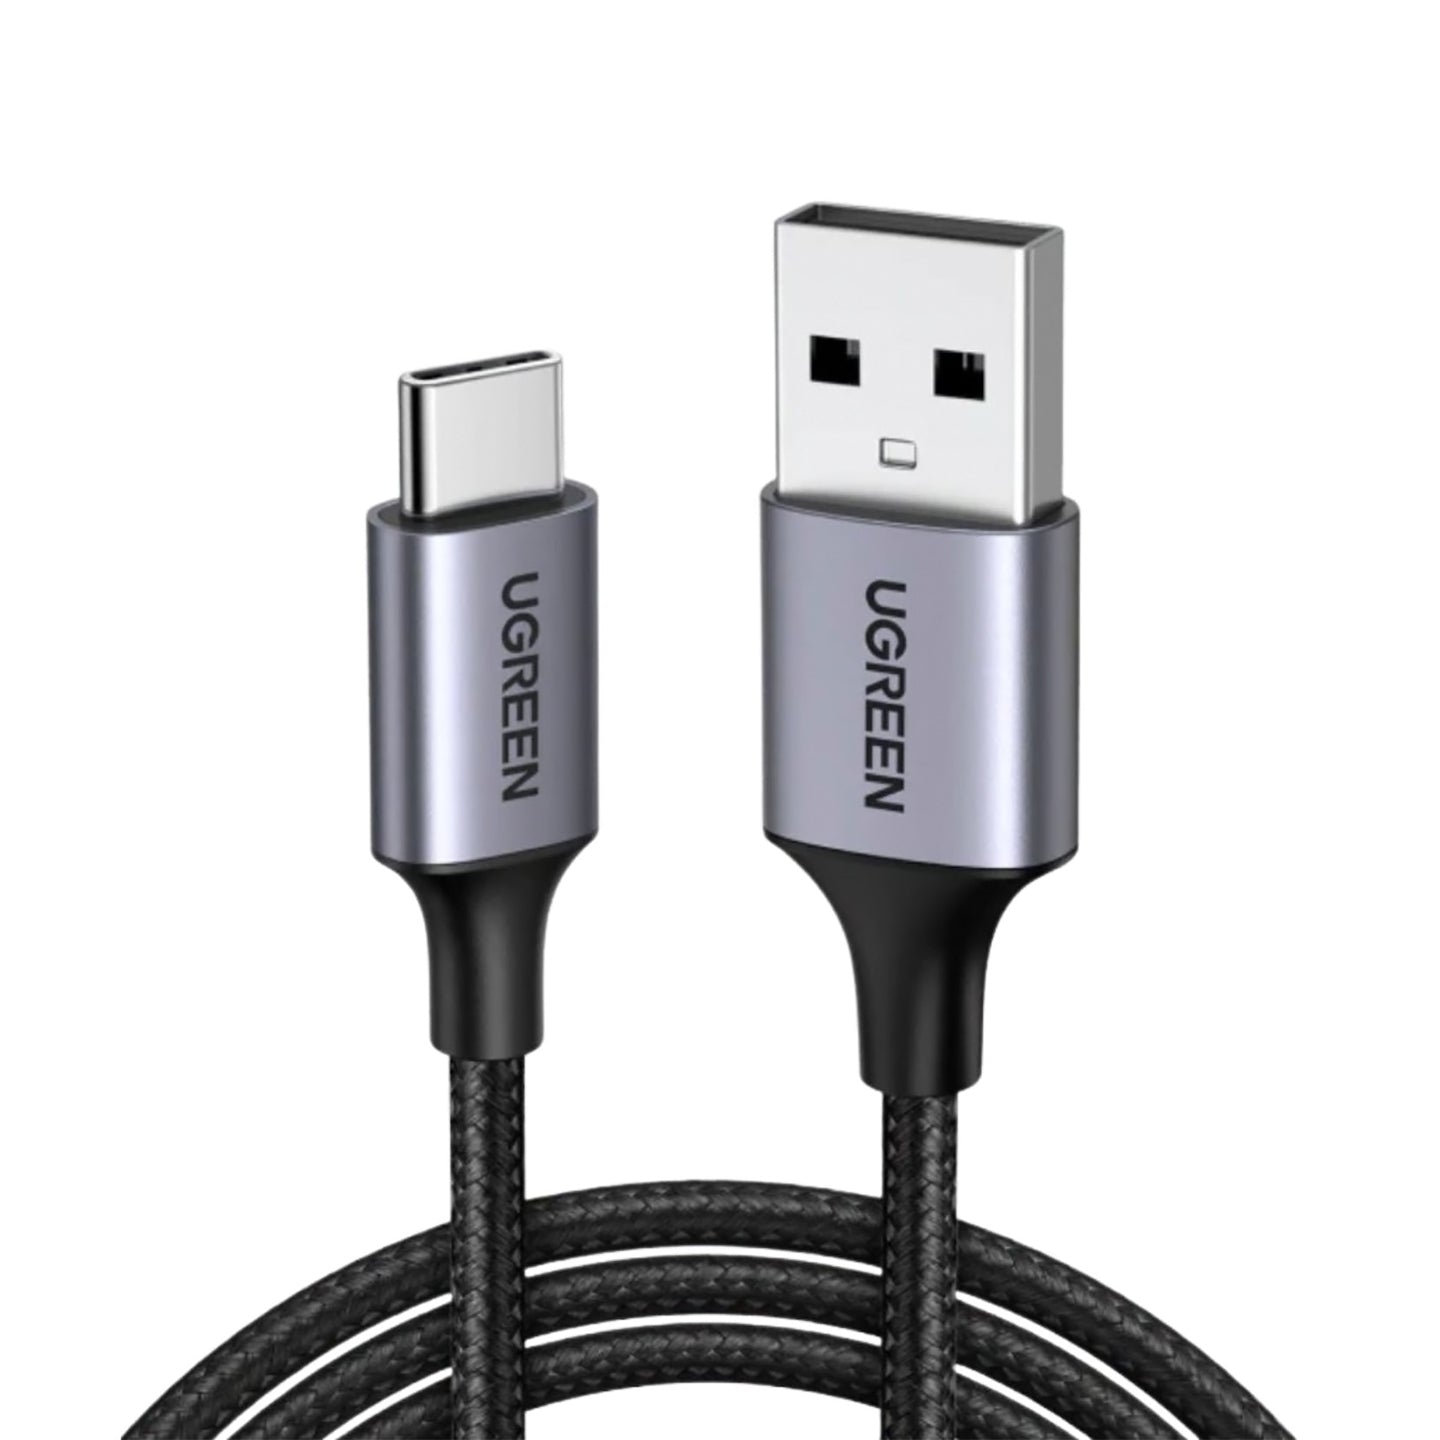 UGREEN USB-A 2.0 to USB-C Cable with Tinned Copper Core and Multiple Shielding Layer for Smartphones and Tablets (Available in 0.25M, 0.5M, 1M, 1.5M and 2M)